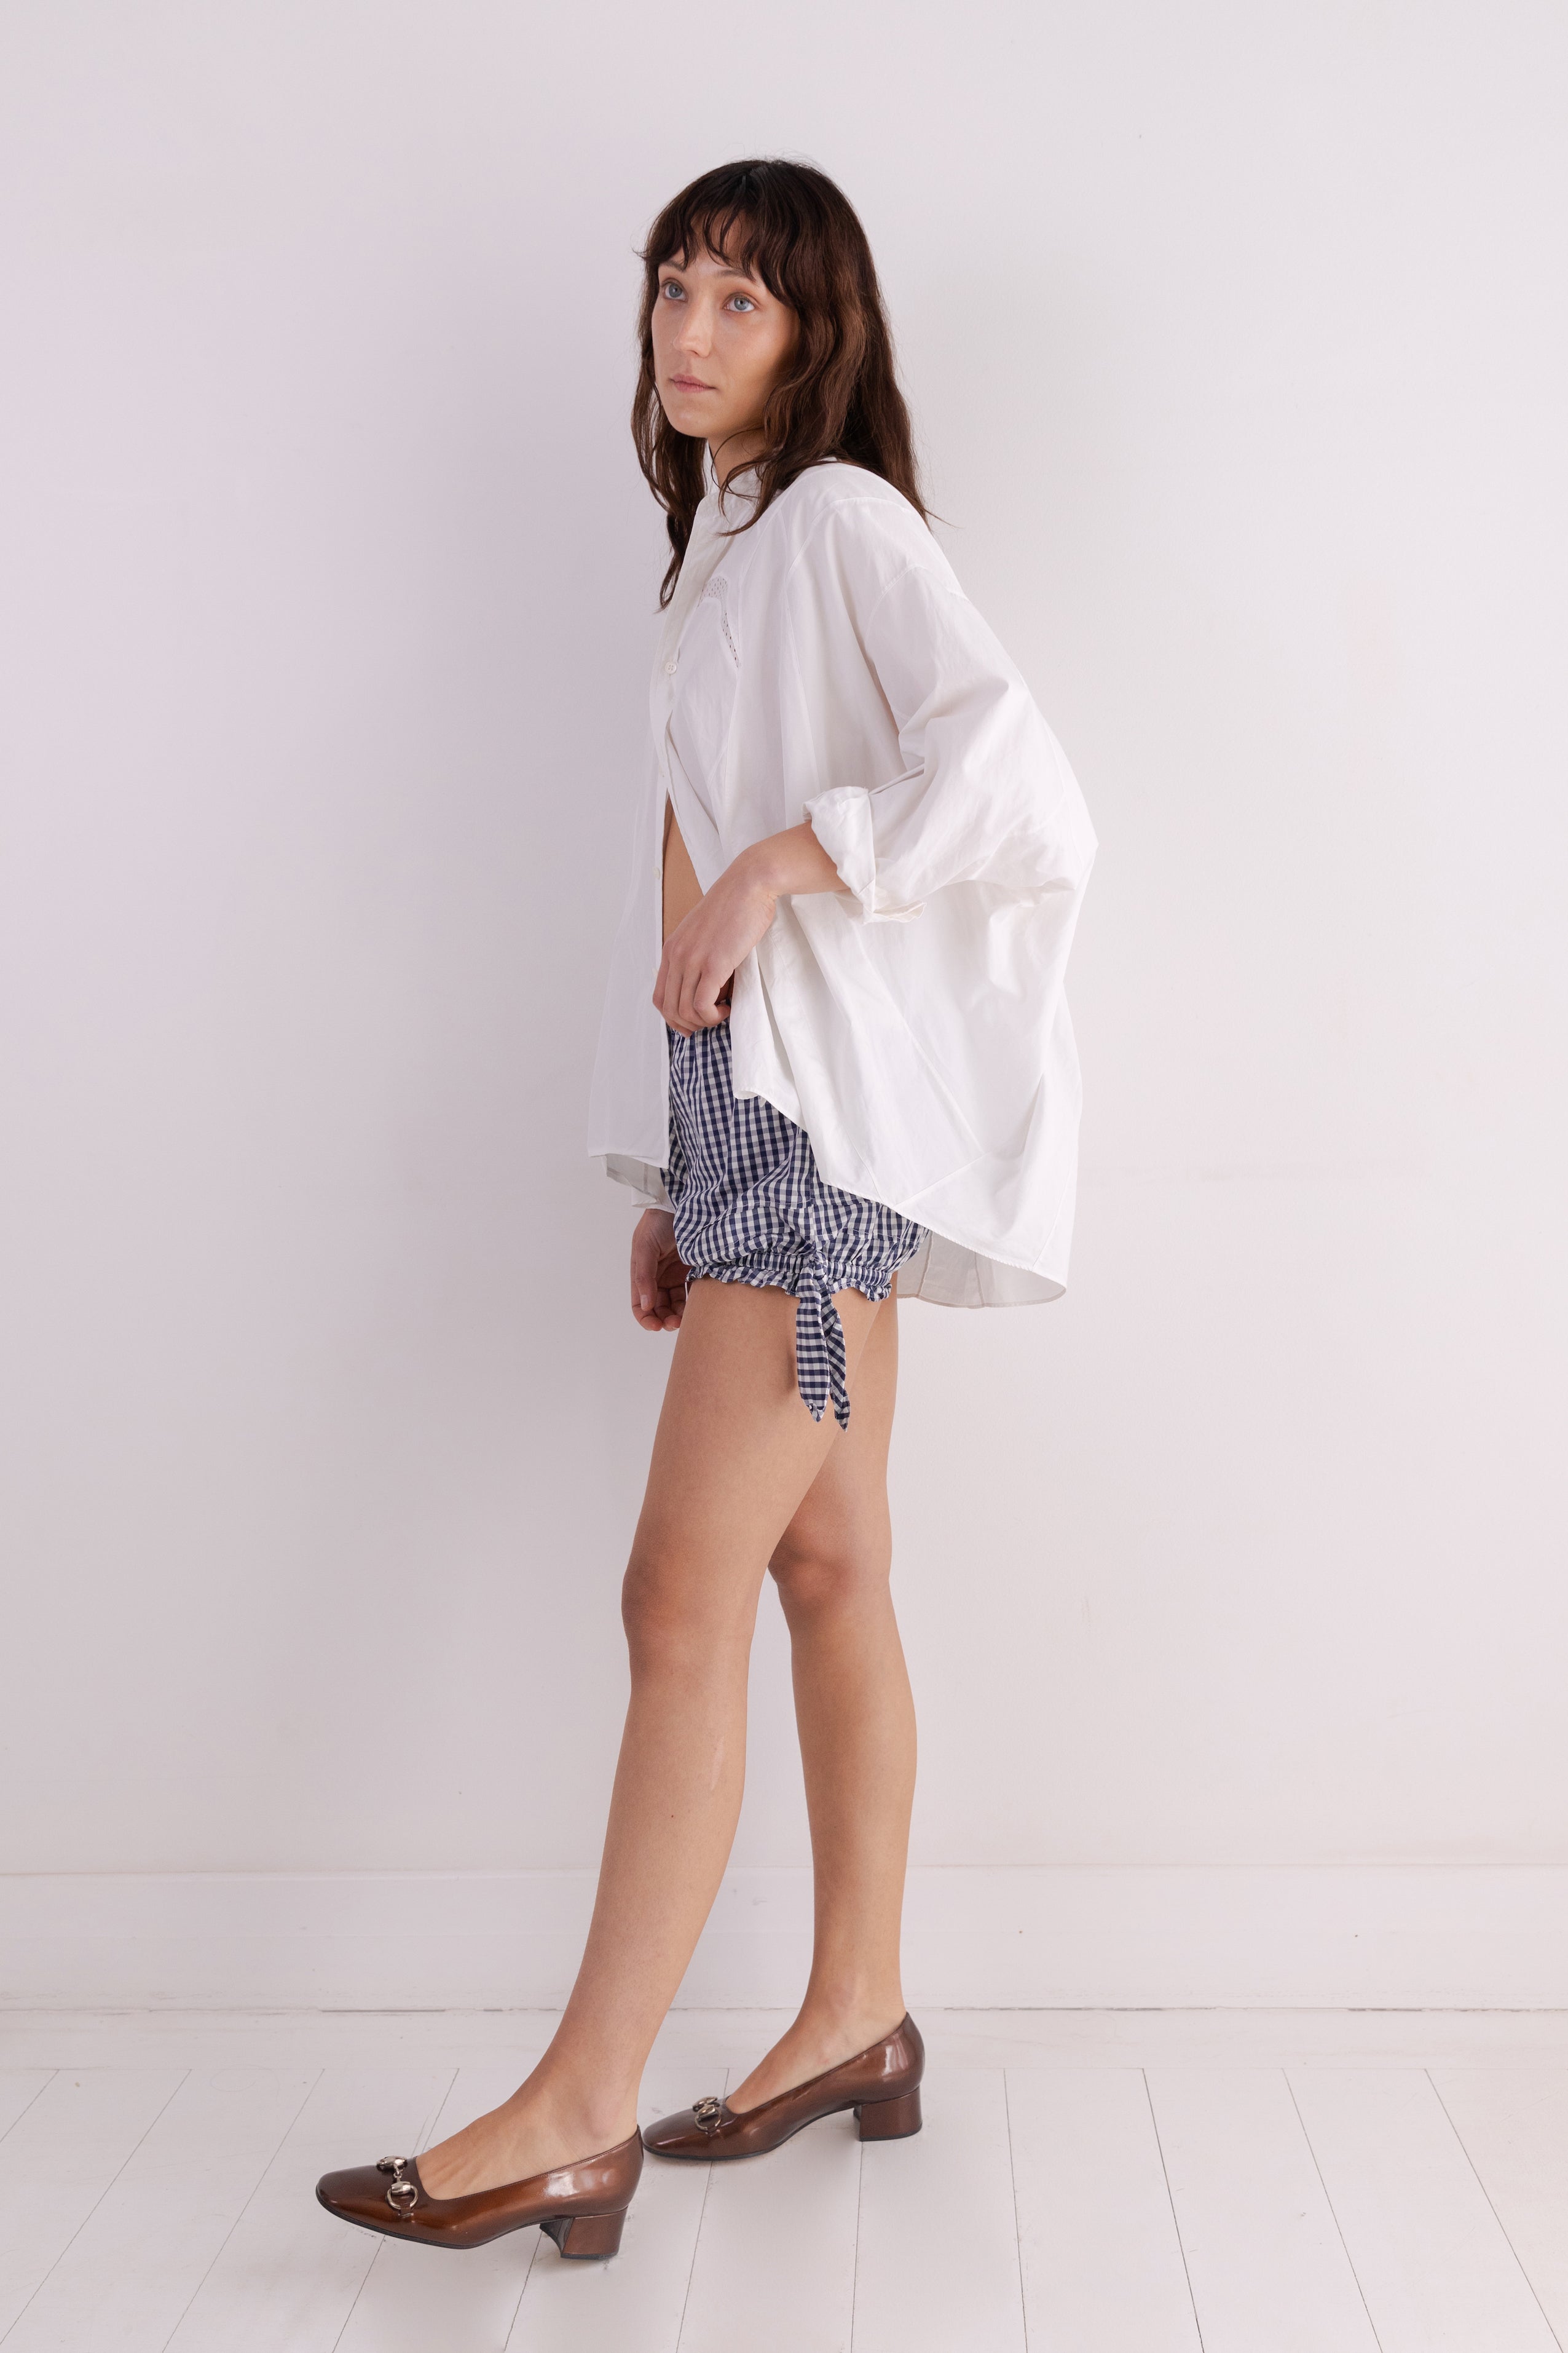 Dolce & Gabbana <br> S/S 2011 D&G gingham bloomers